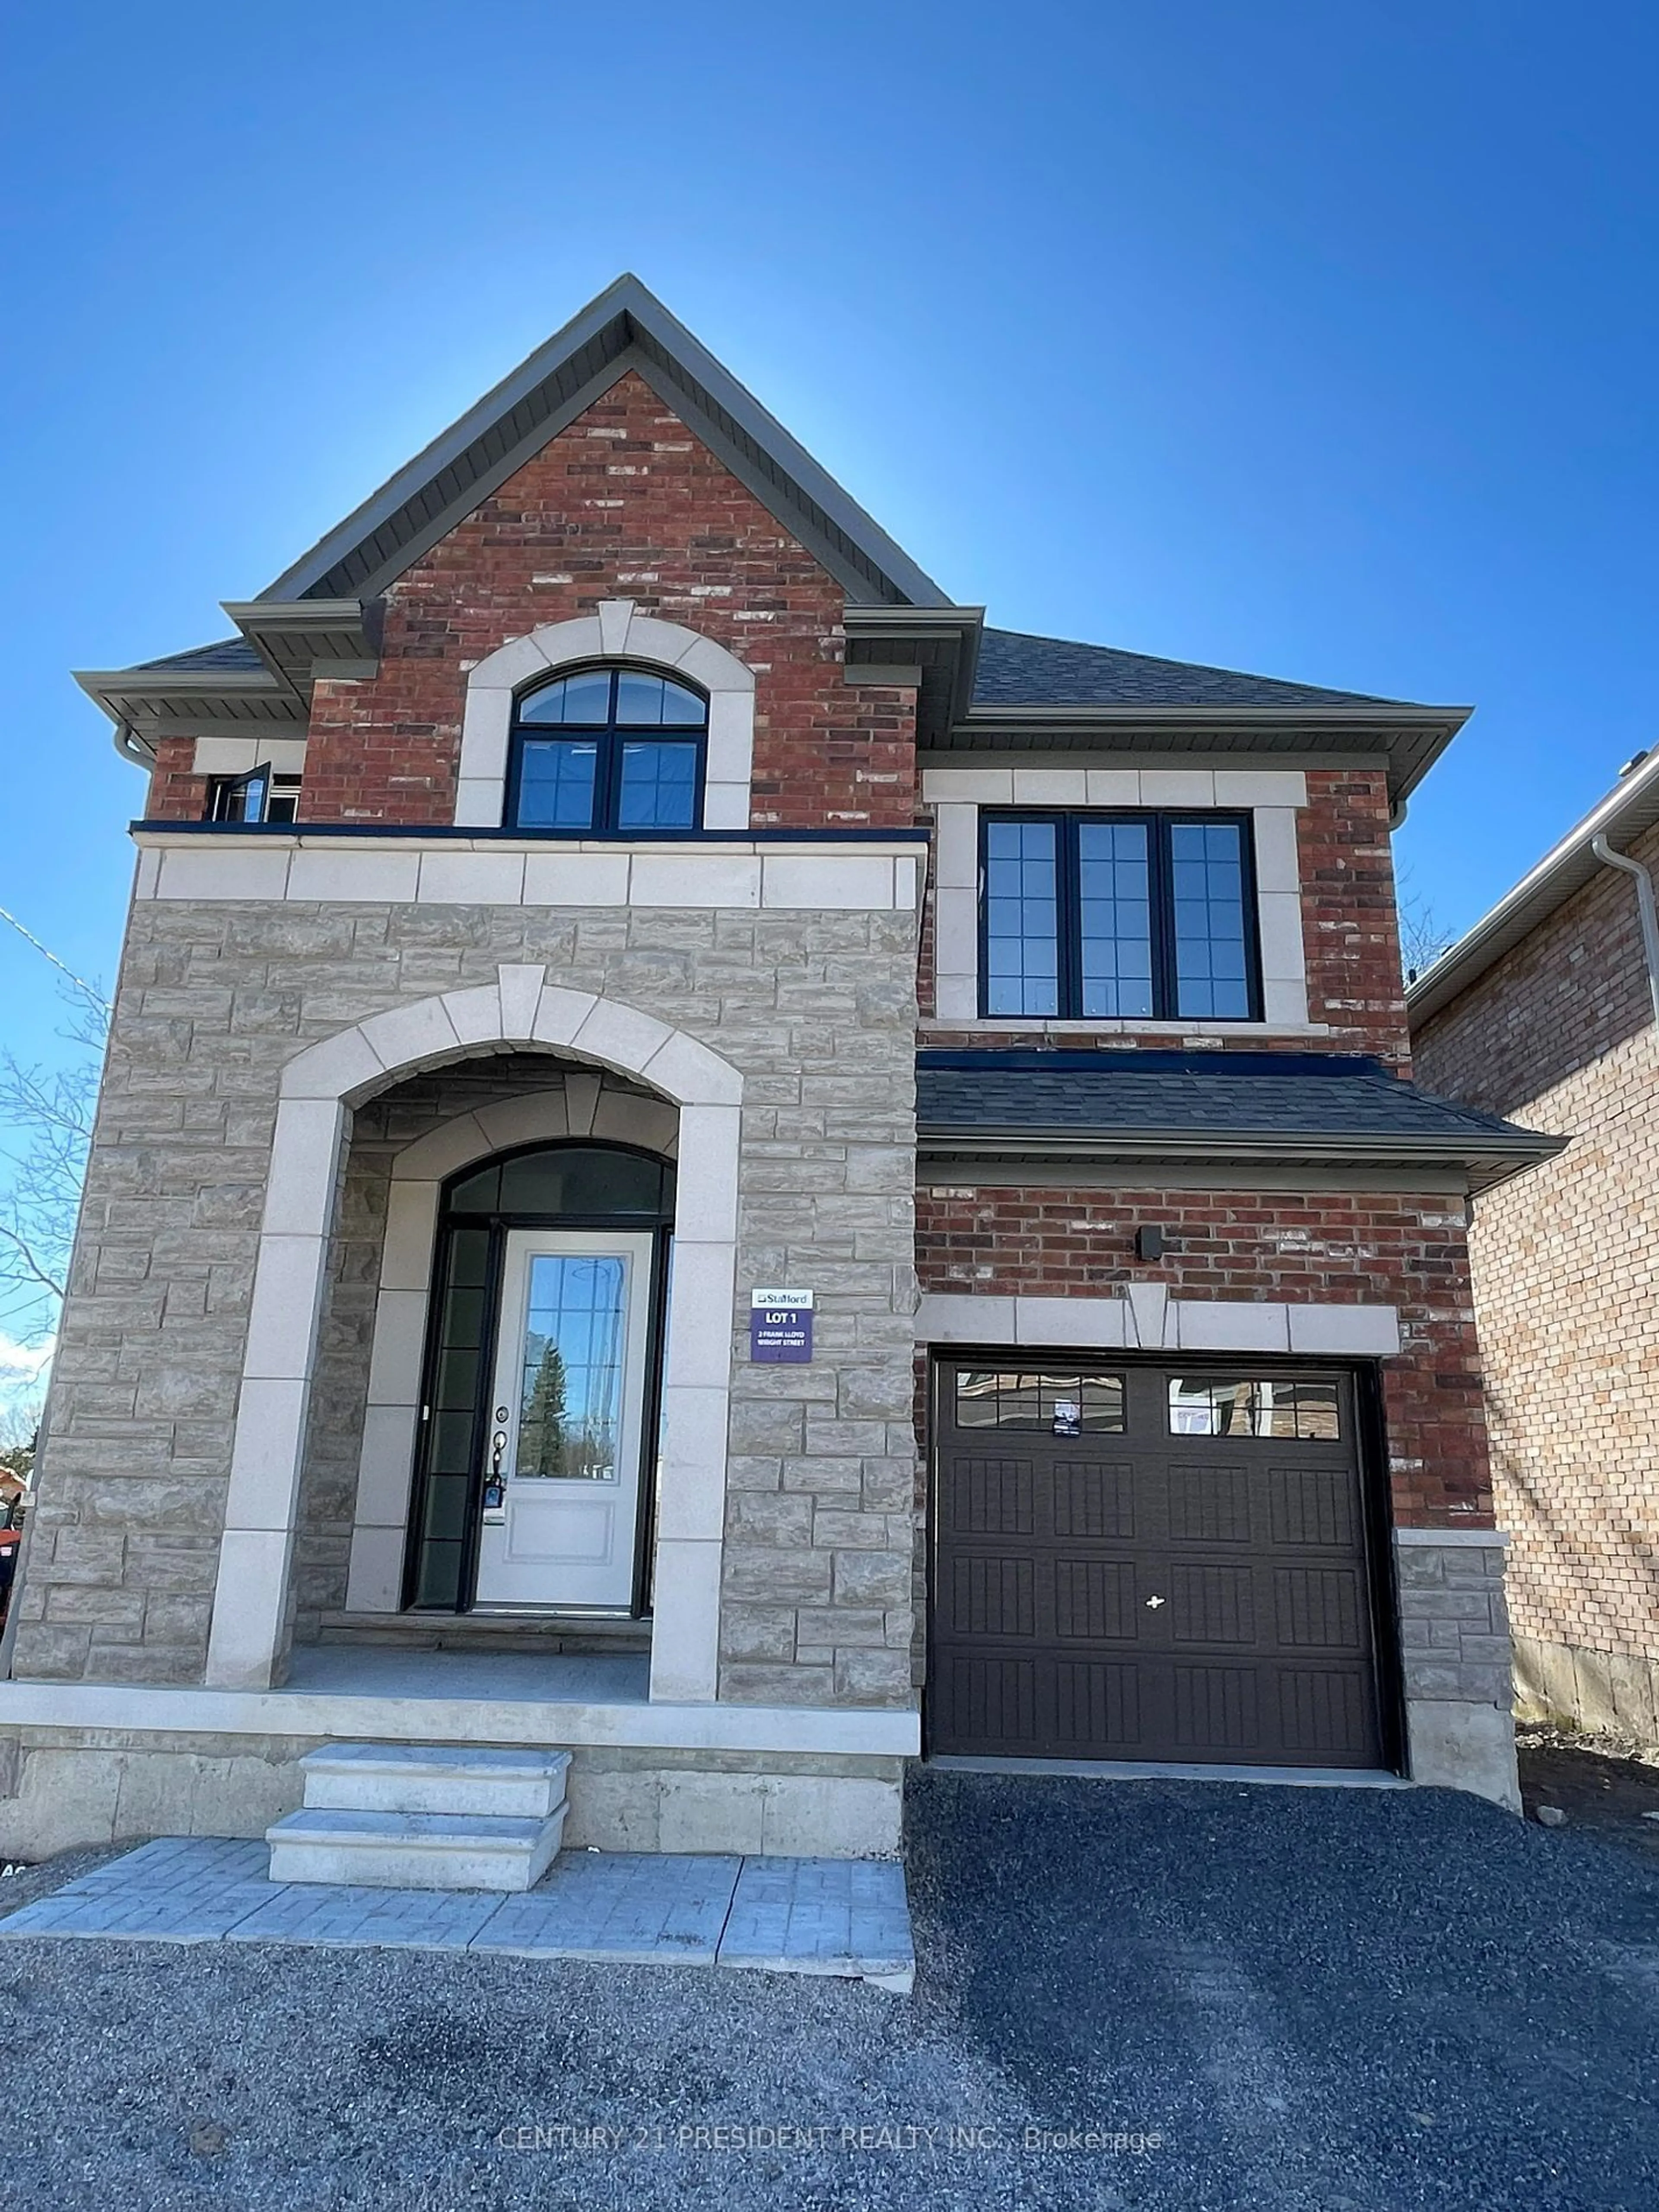 Home with brick exterior material for 2 Franklin Lloyd Wright St, Whitby Ontario L1N 0N9